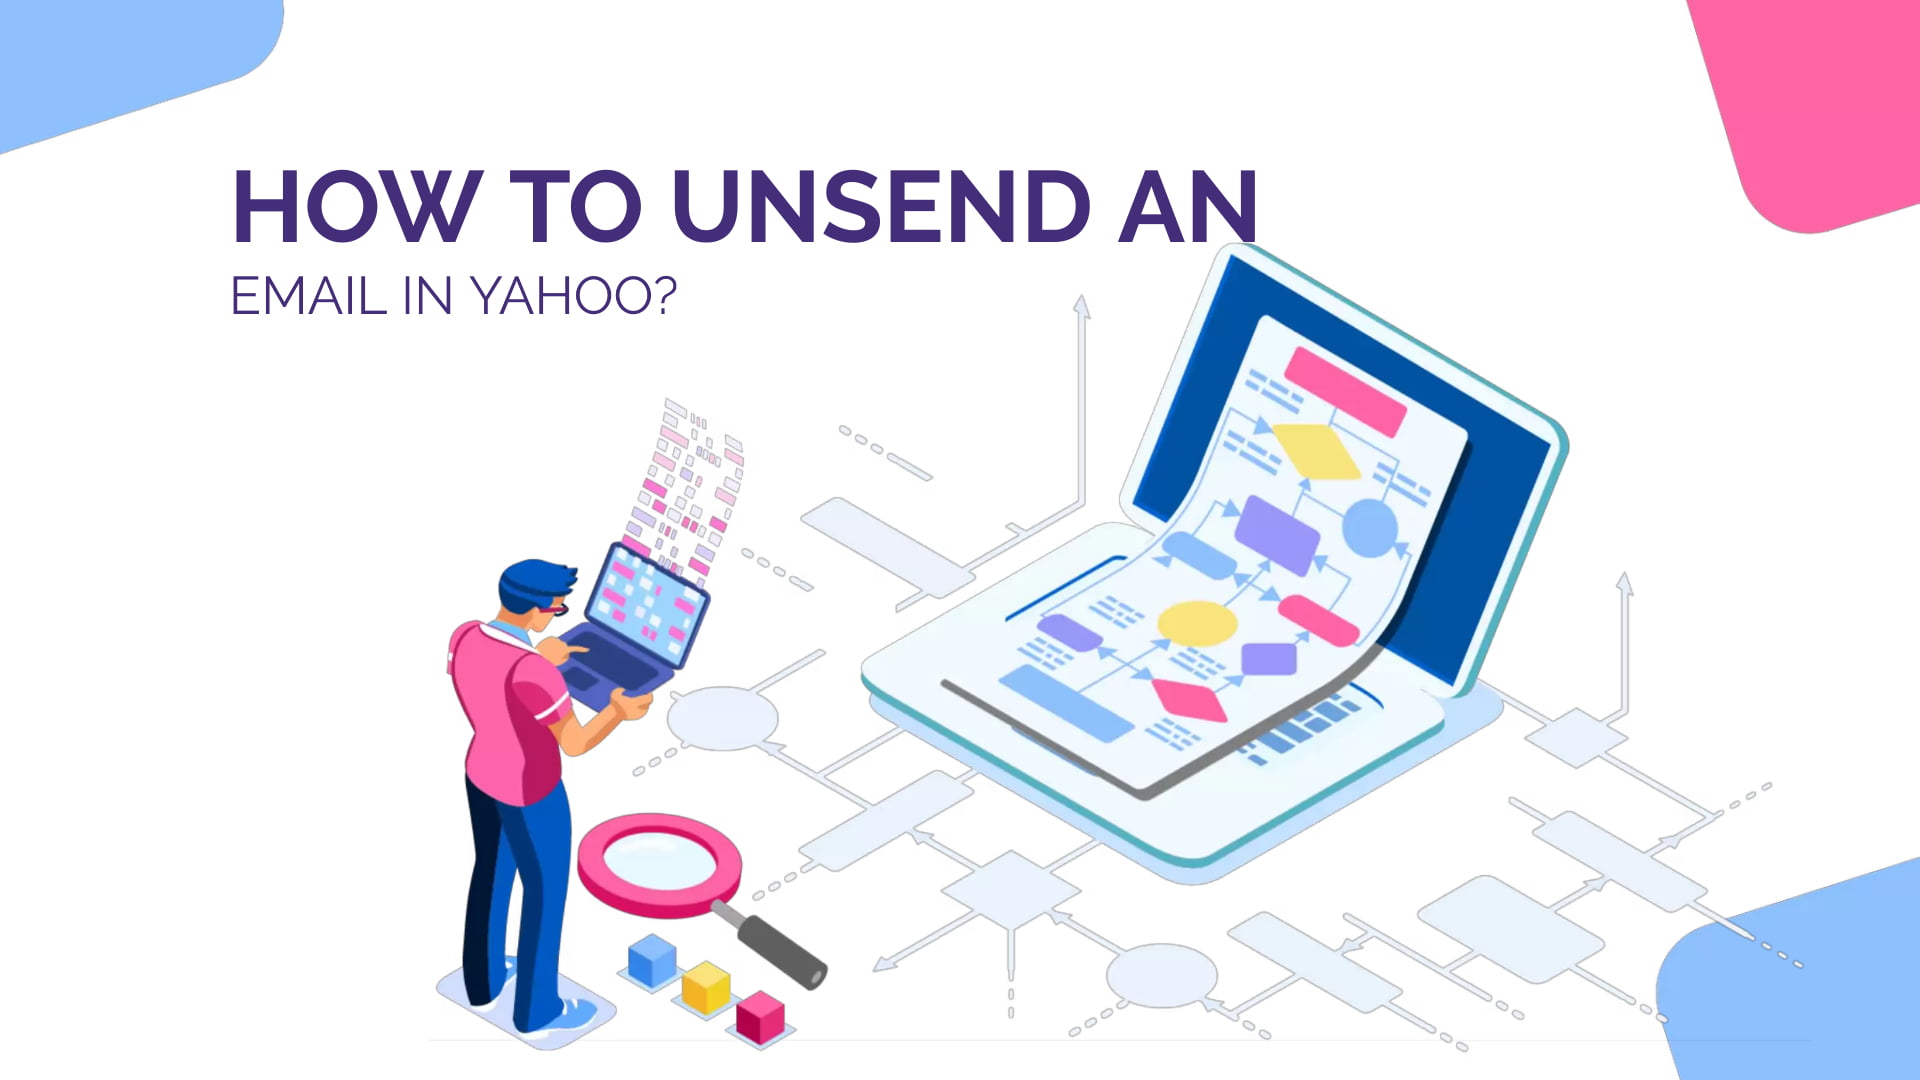 How to Unsend an Email in Yahoo?